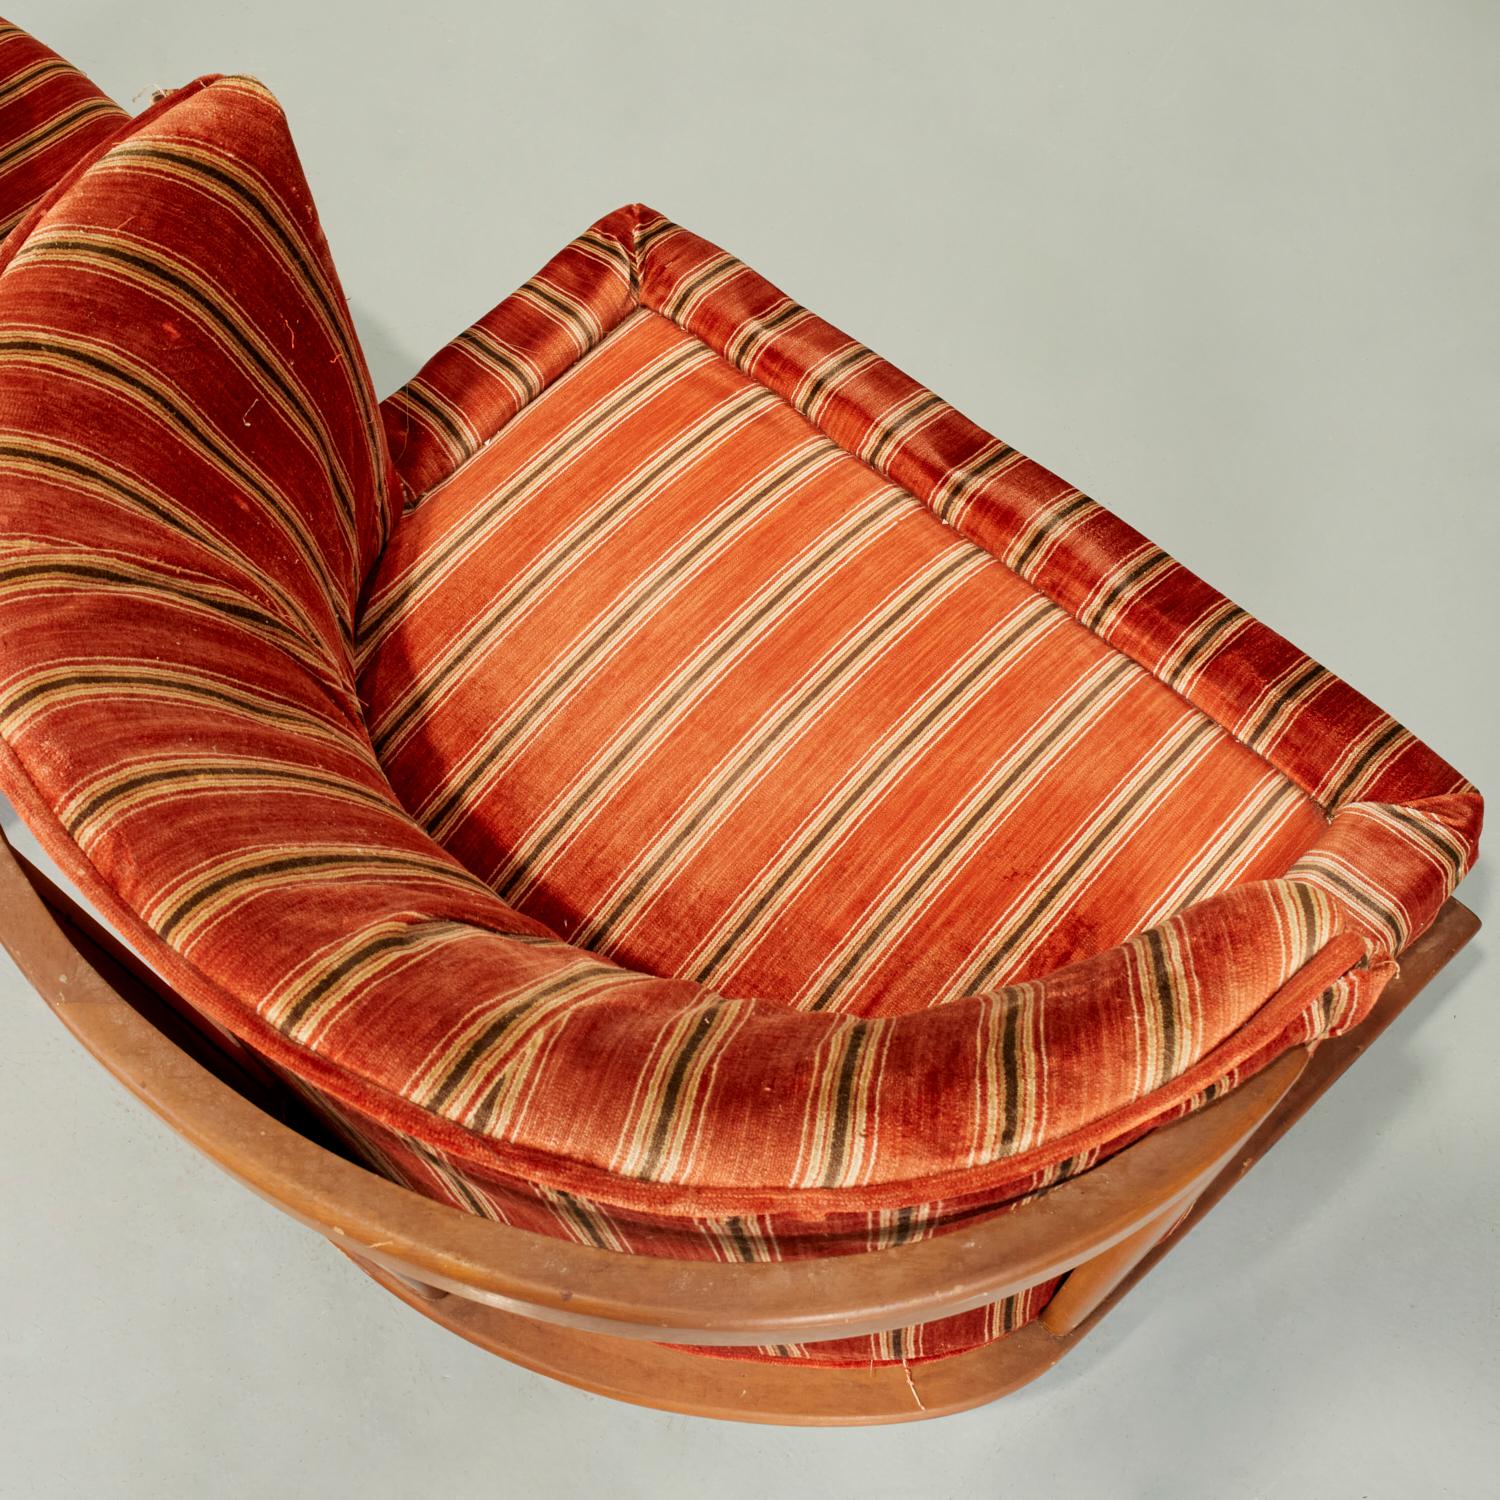 Mid-Century Modern 1950's Tomlinson Slipper Chairs in Vibrant Striped Upholstery, a Pair